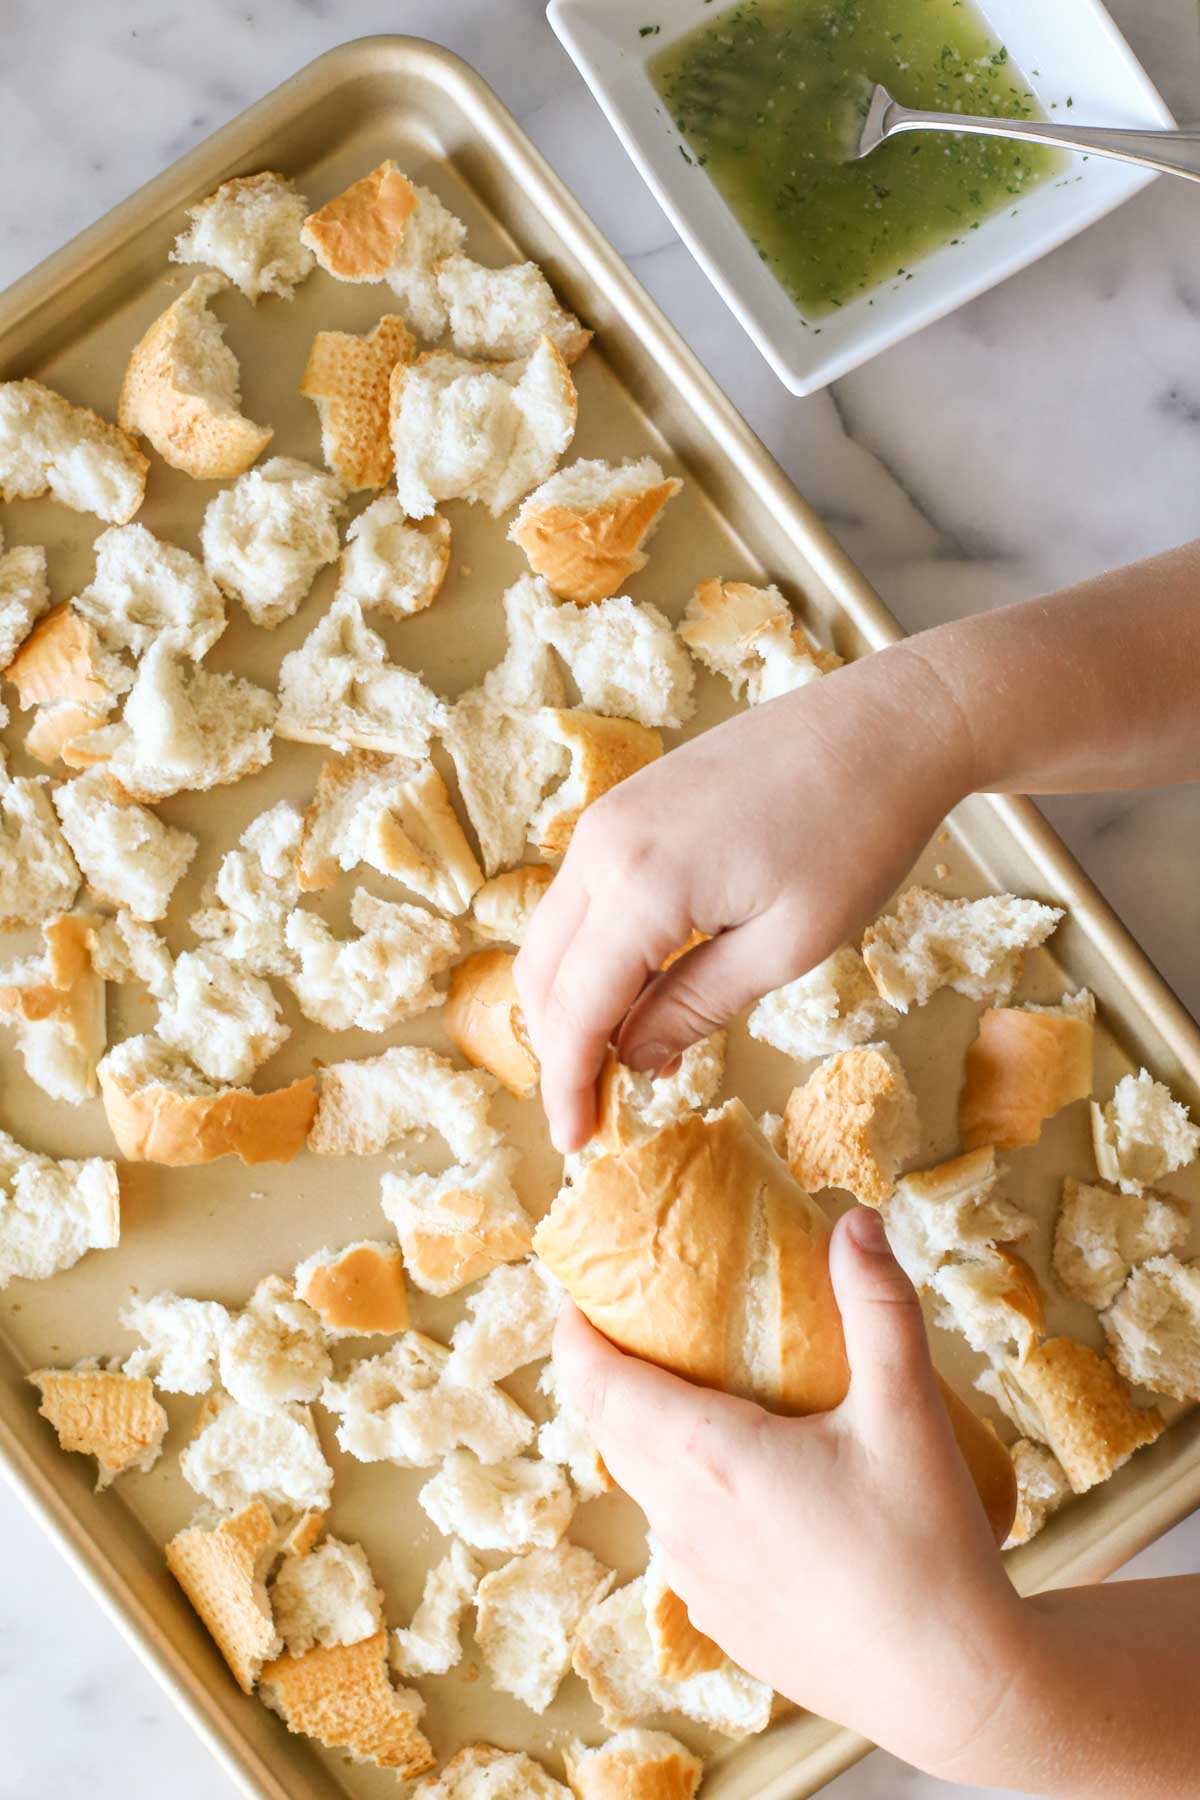 Overhead shot of a hand tearing the French bread into pieces over a baking sheet, with a square bowl of the butter mixture next to the baking sheet. 